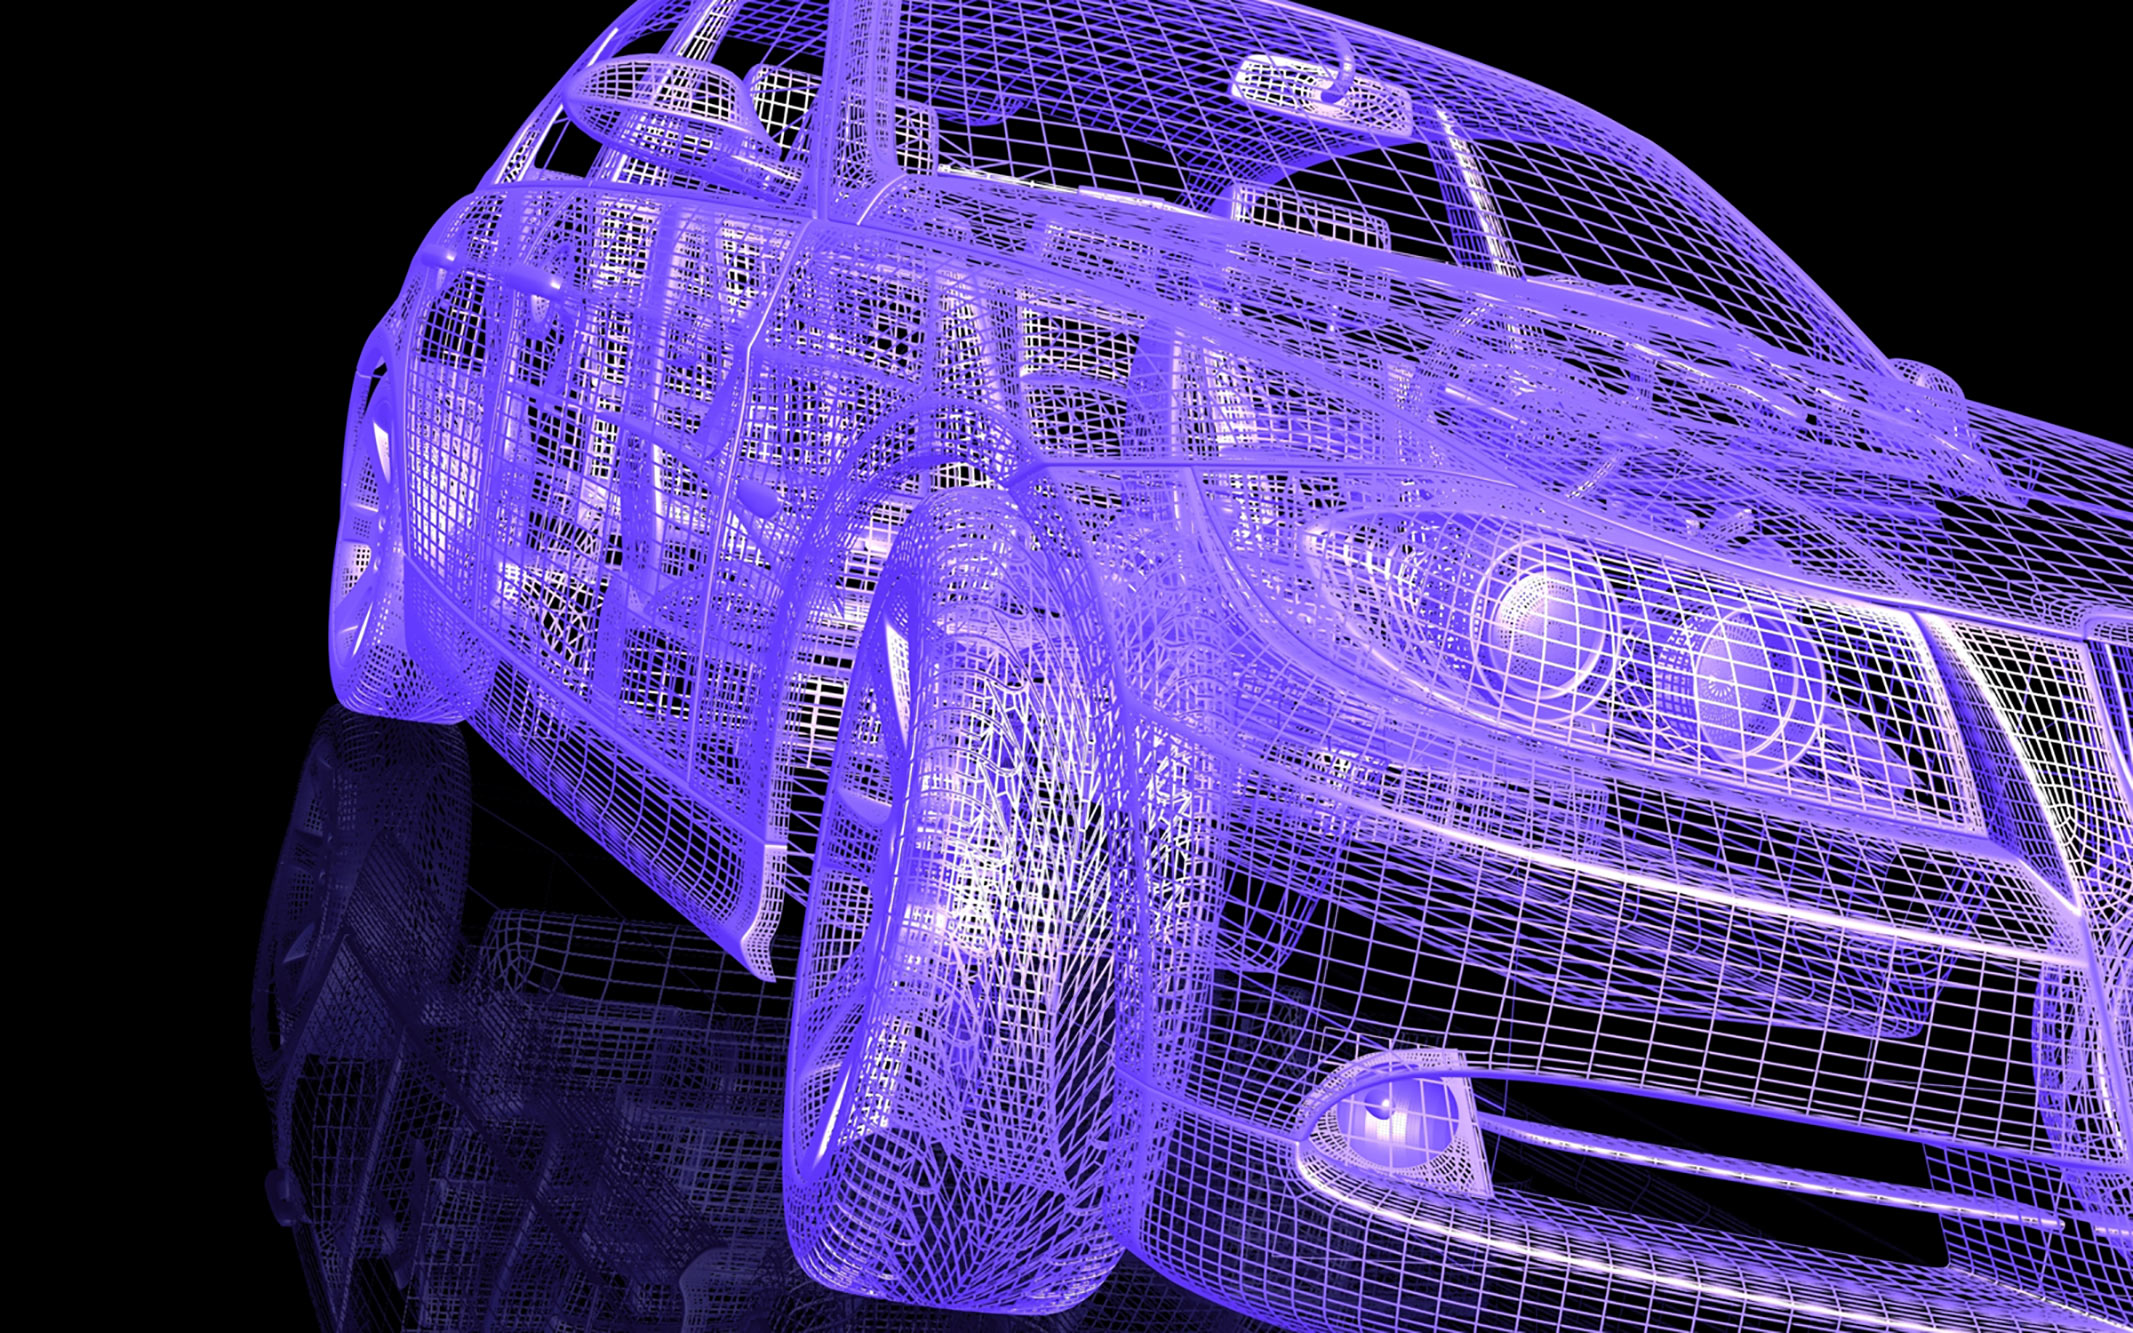 3D technology in the automotive sector is still developing.